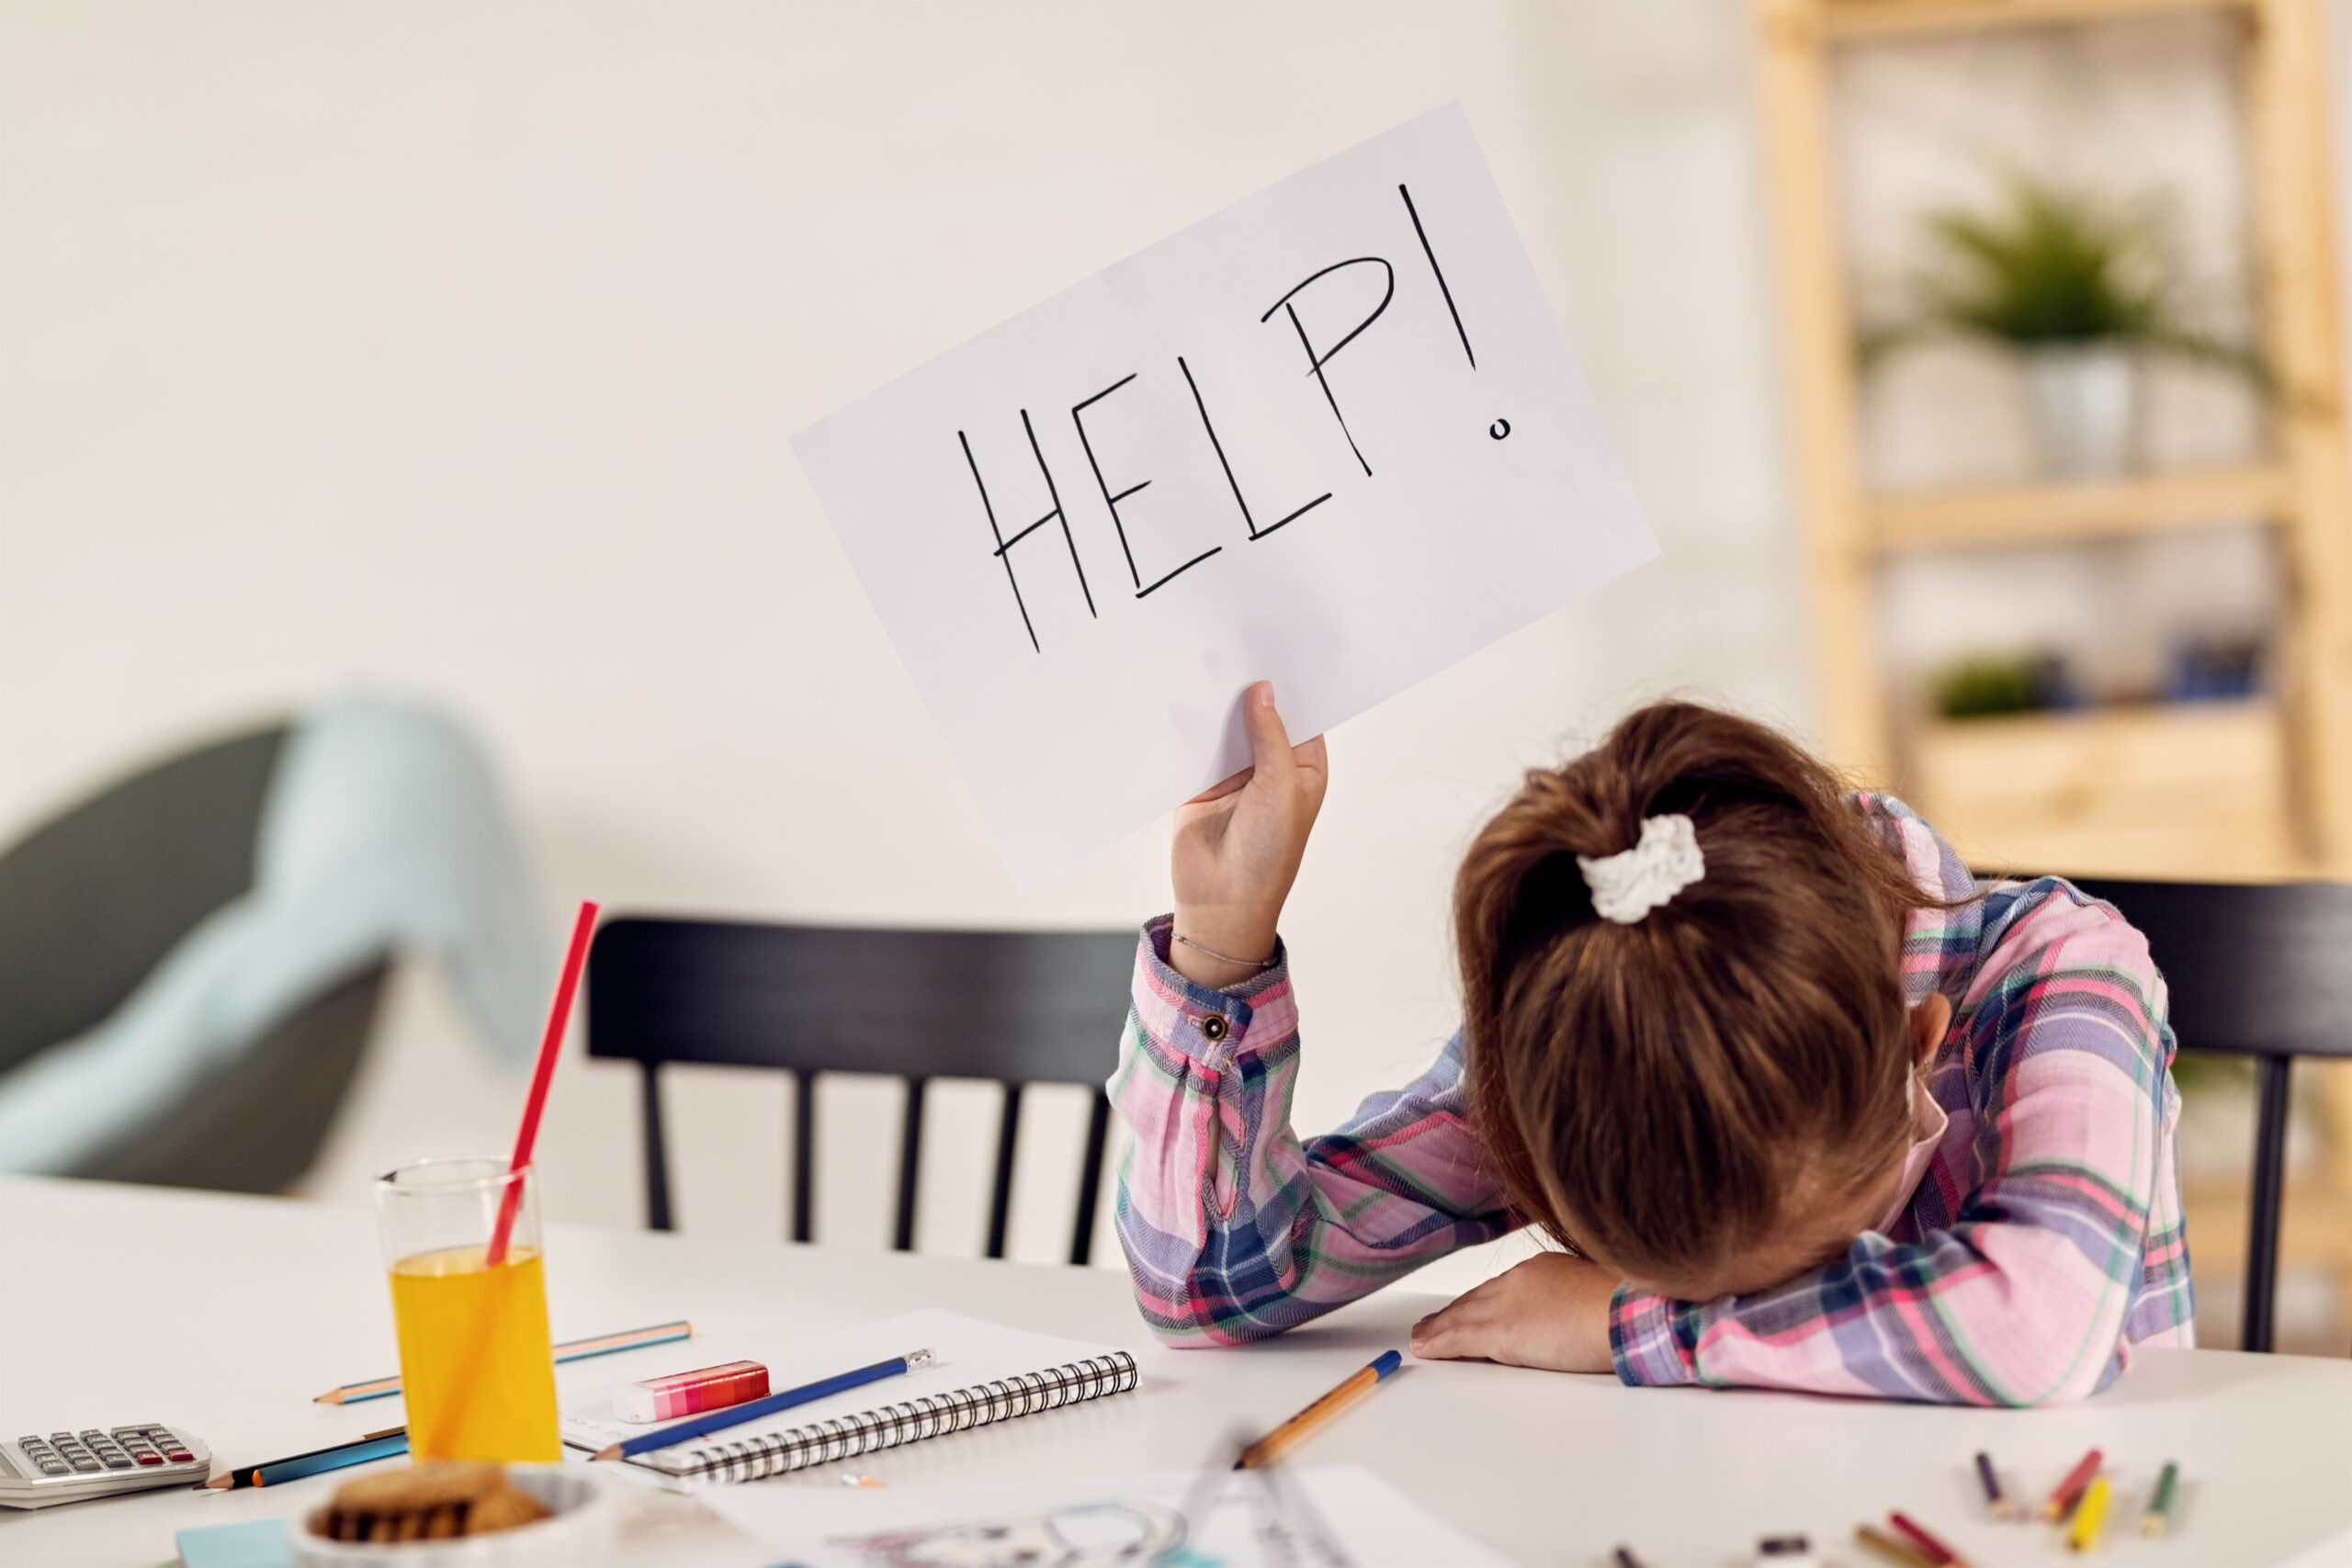 ADHD: What Is, Causes, Symptoms, and Diagnosis